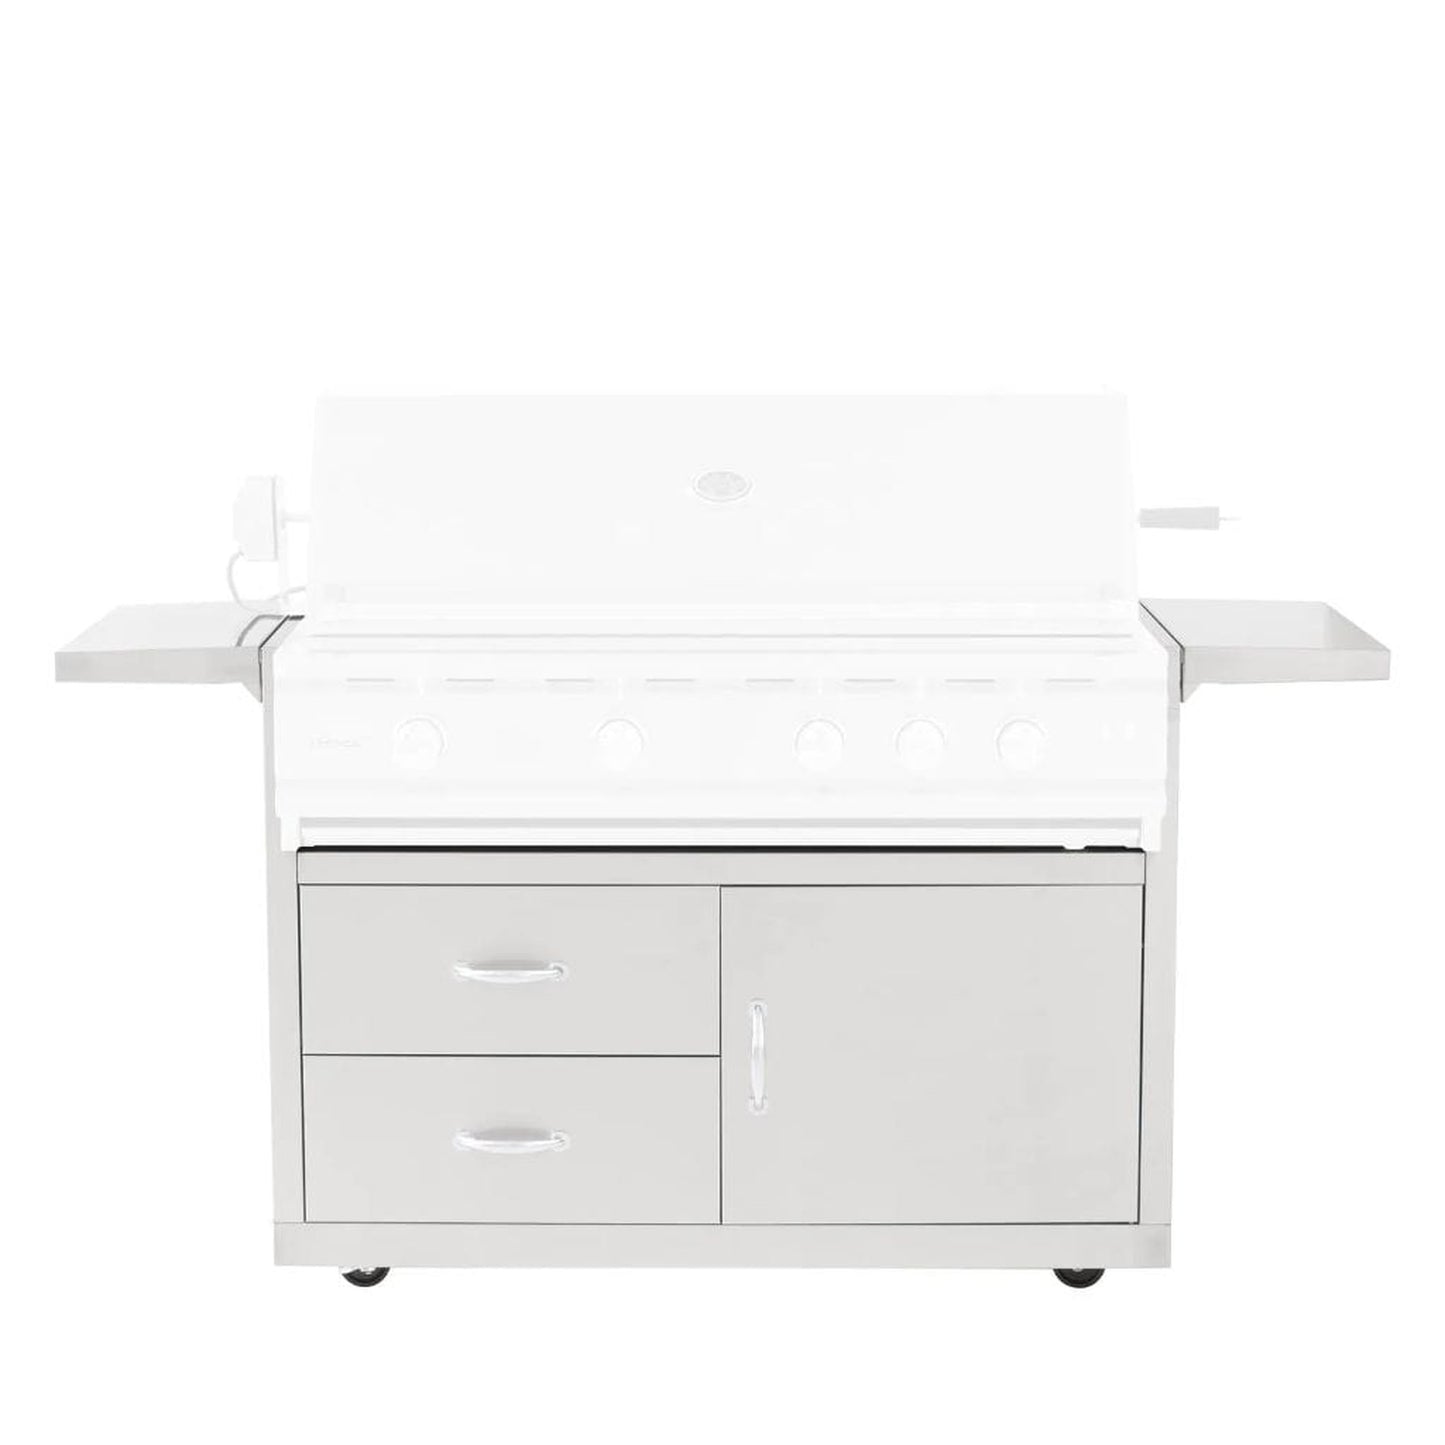 Summerset Fully Assembled Door & 2-Drawer Combo Grill Carts for TRL Series (Cart Only)